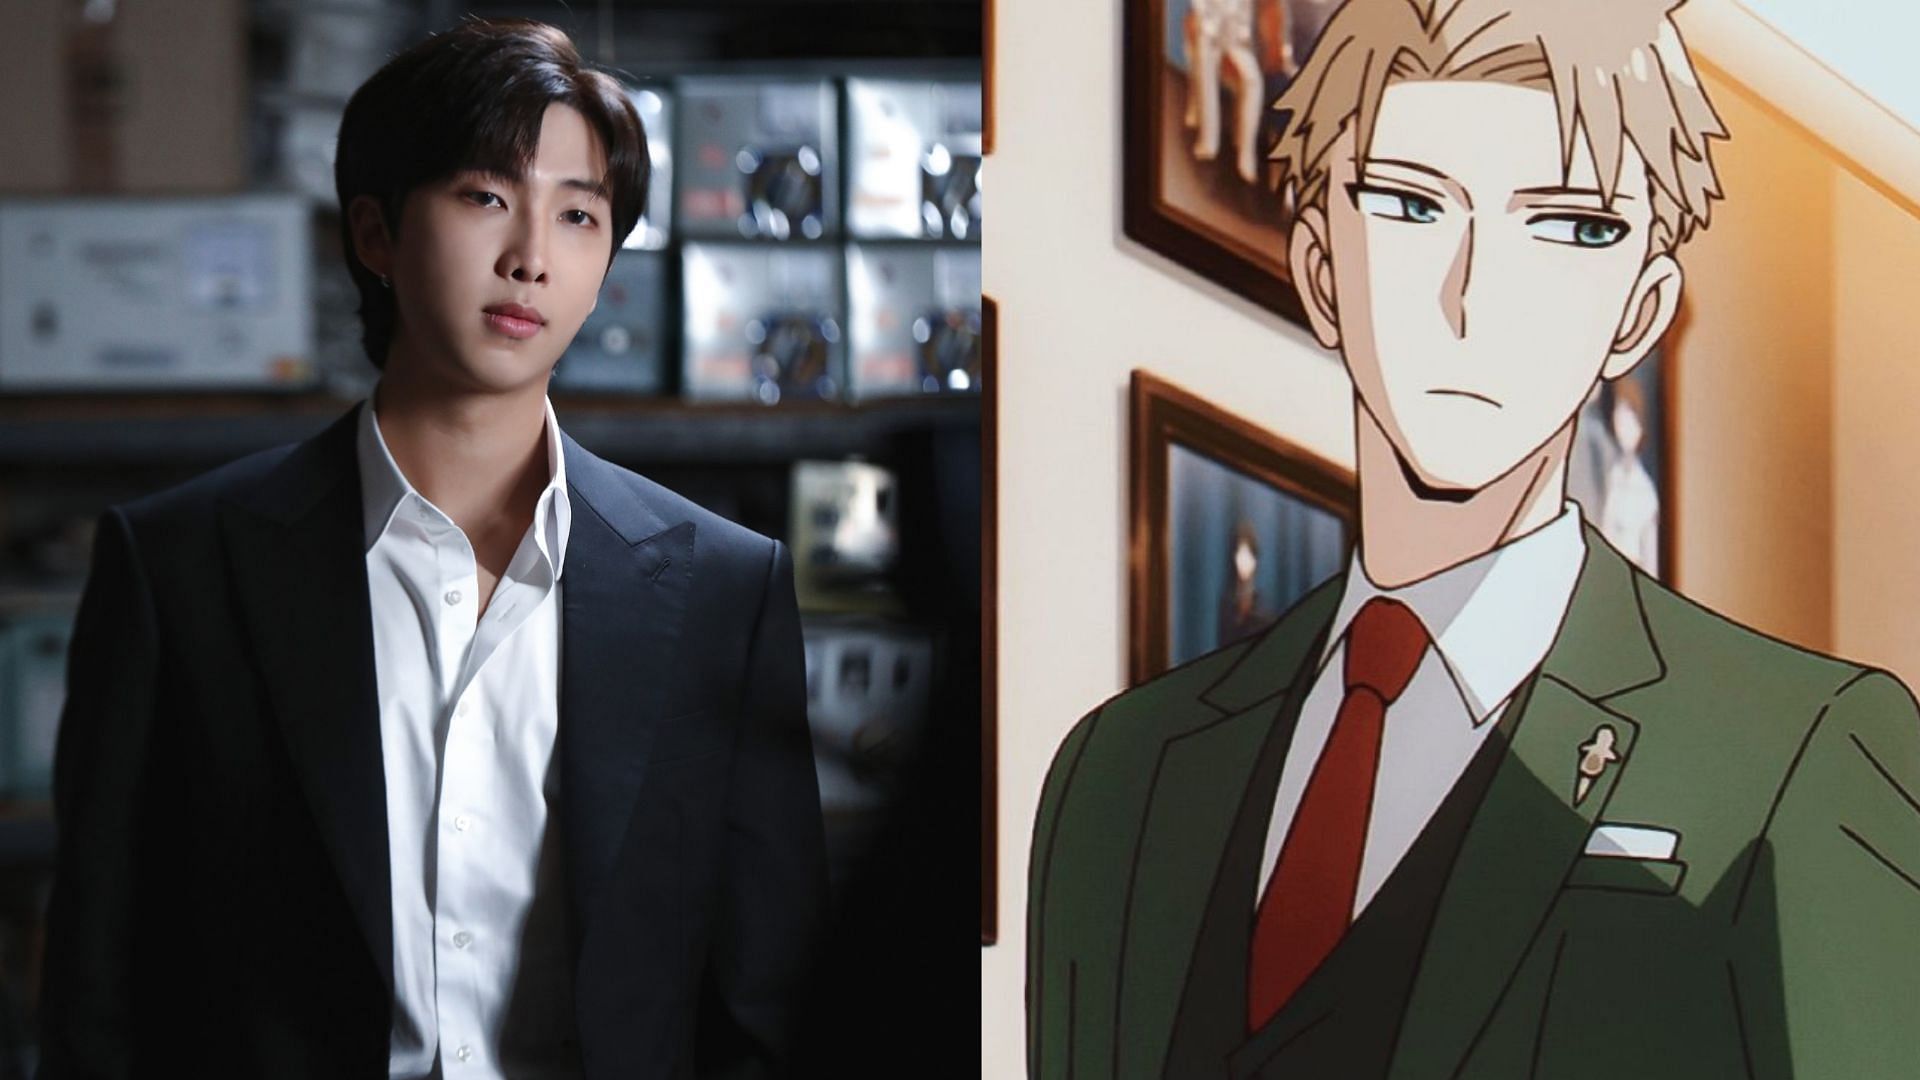 BTS members as anime characters: Jin as Gojo, RM as Loid, and more